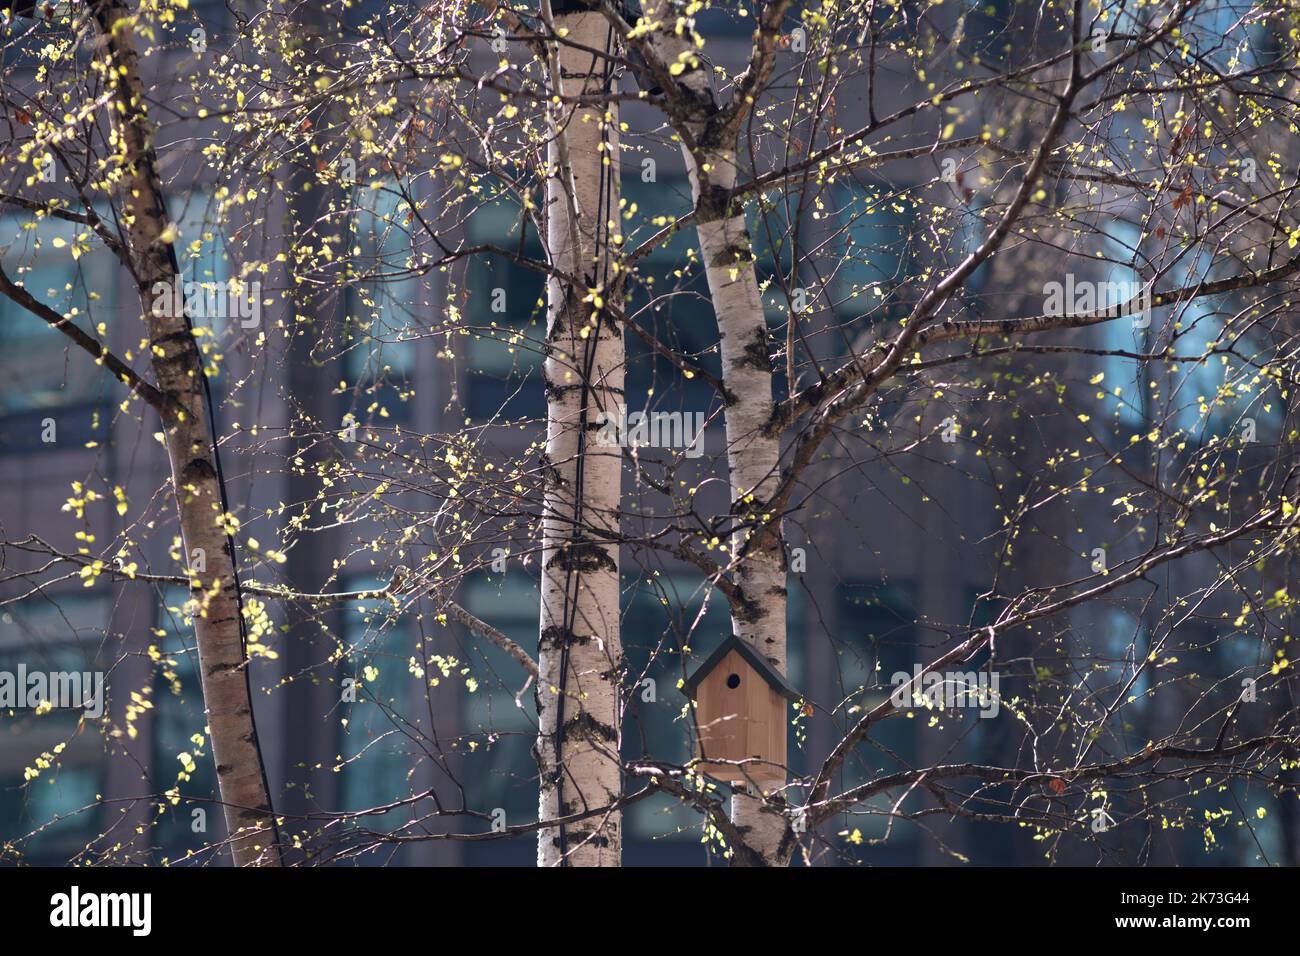 Detail of silver birch trees. Exchange Square, London, United Kingdom. Architect: DSDHA, 2022. Stock Photo